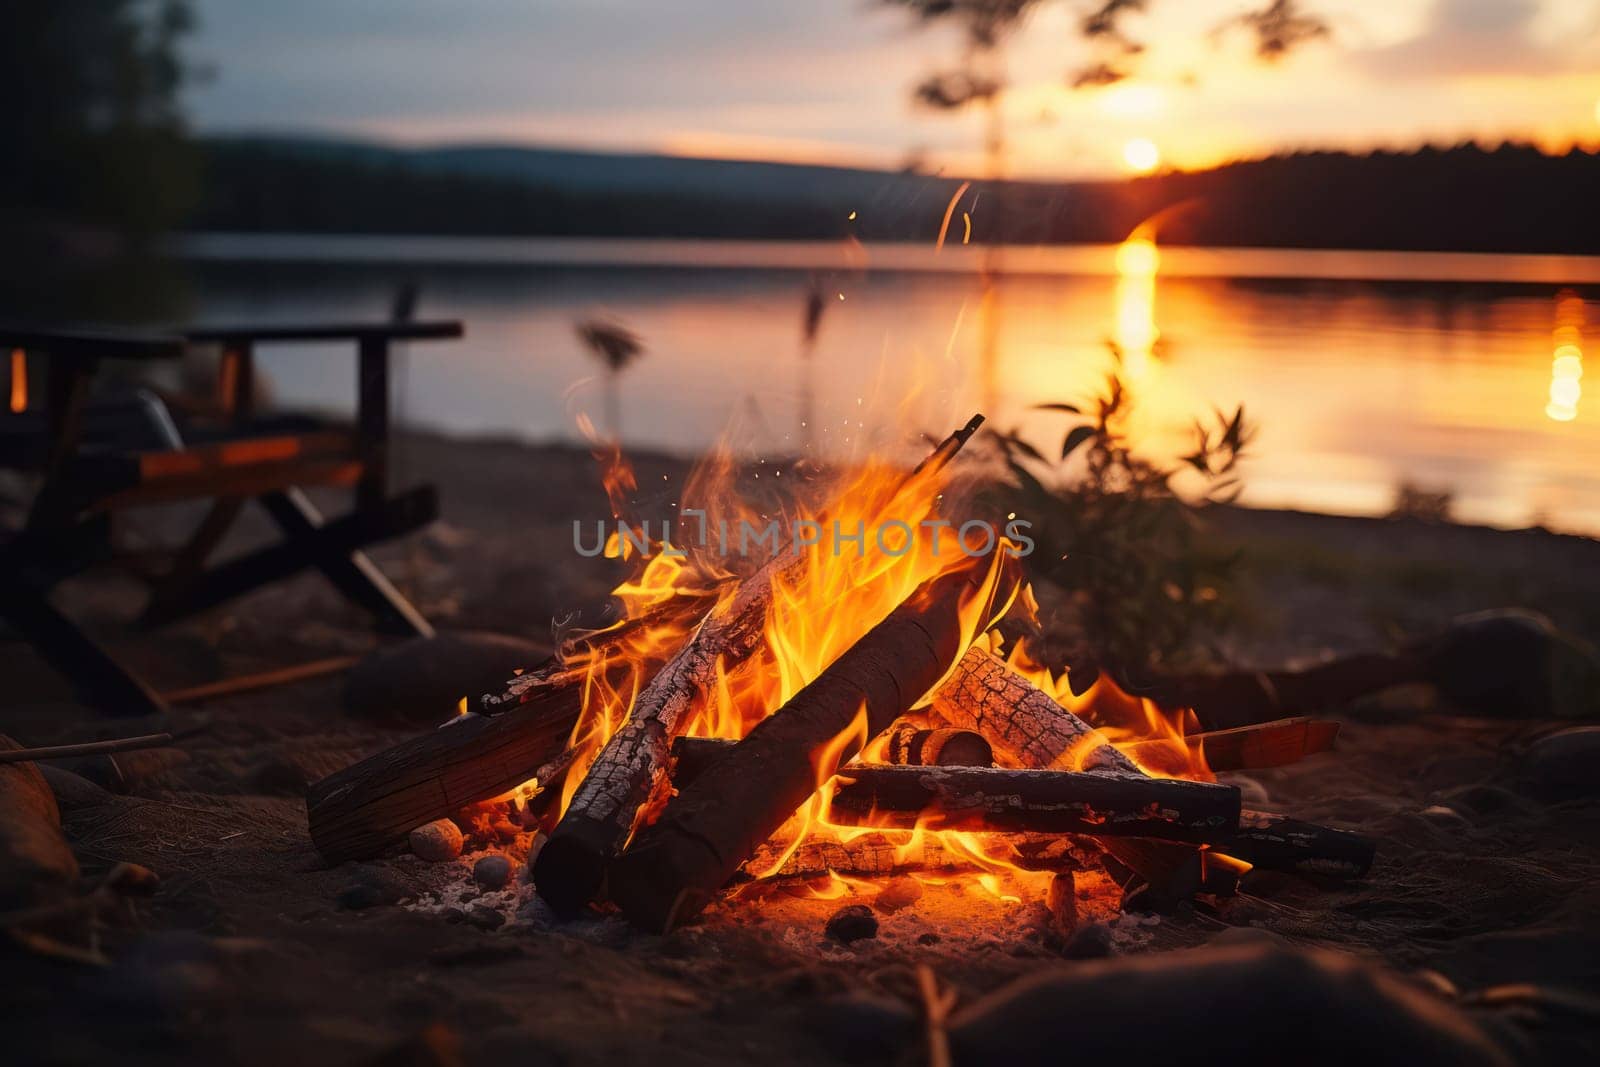 Flaming Campfire at Night: A Bright, Warm Bonfire on a Beach with Red and Orange Flames Reflecting on the Water